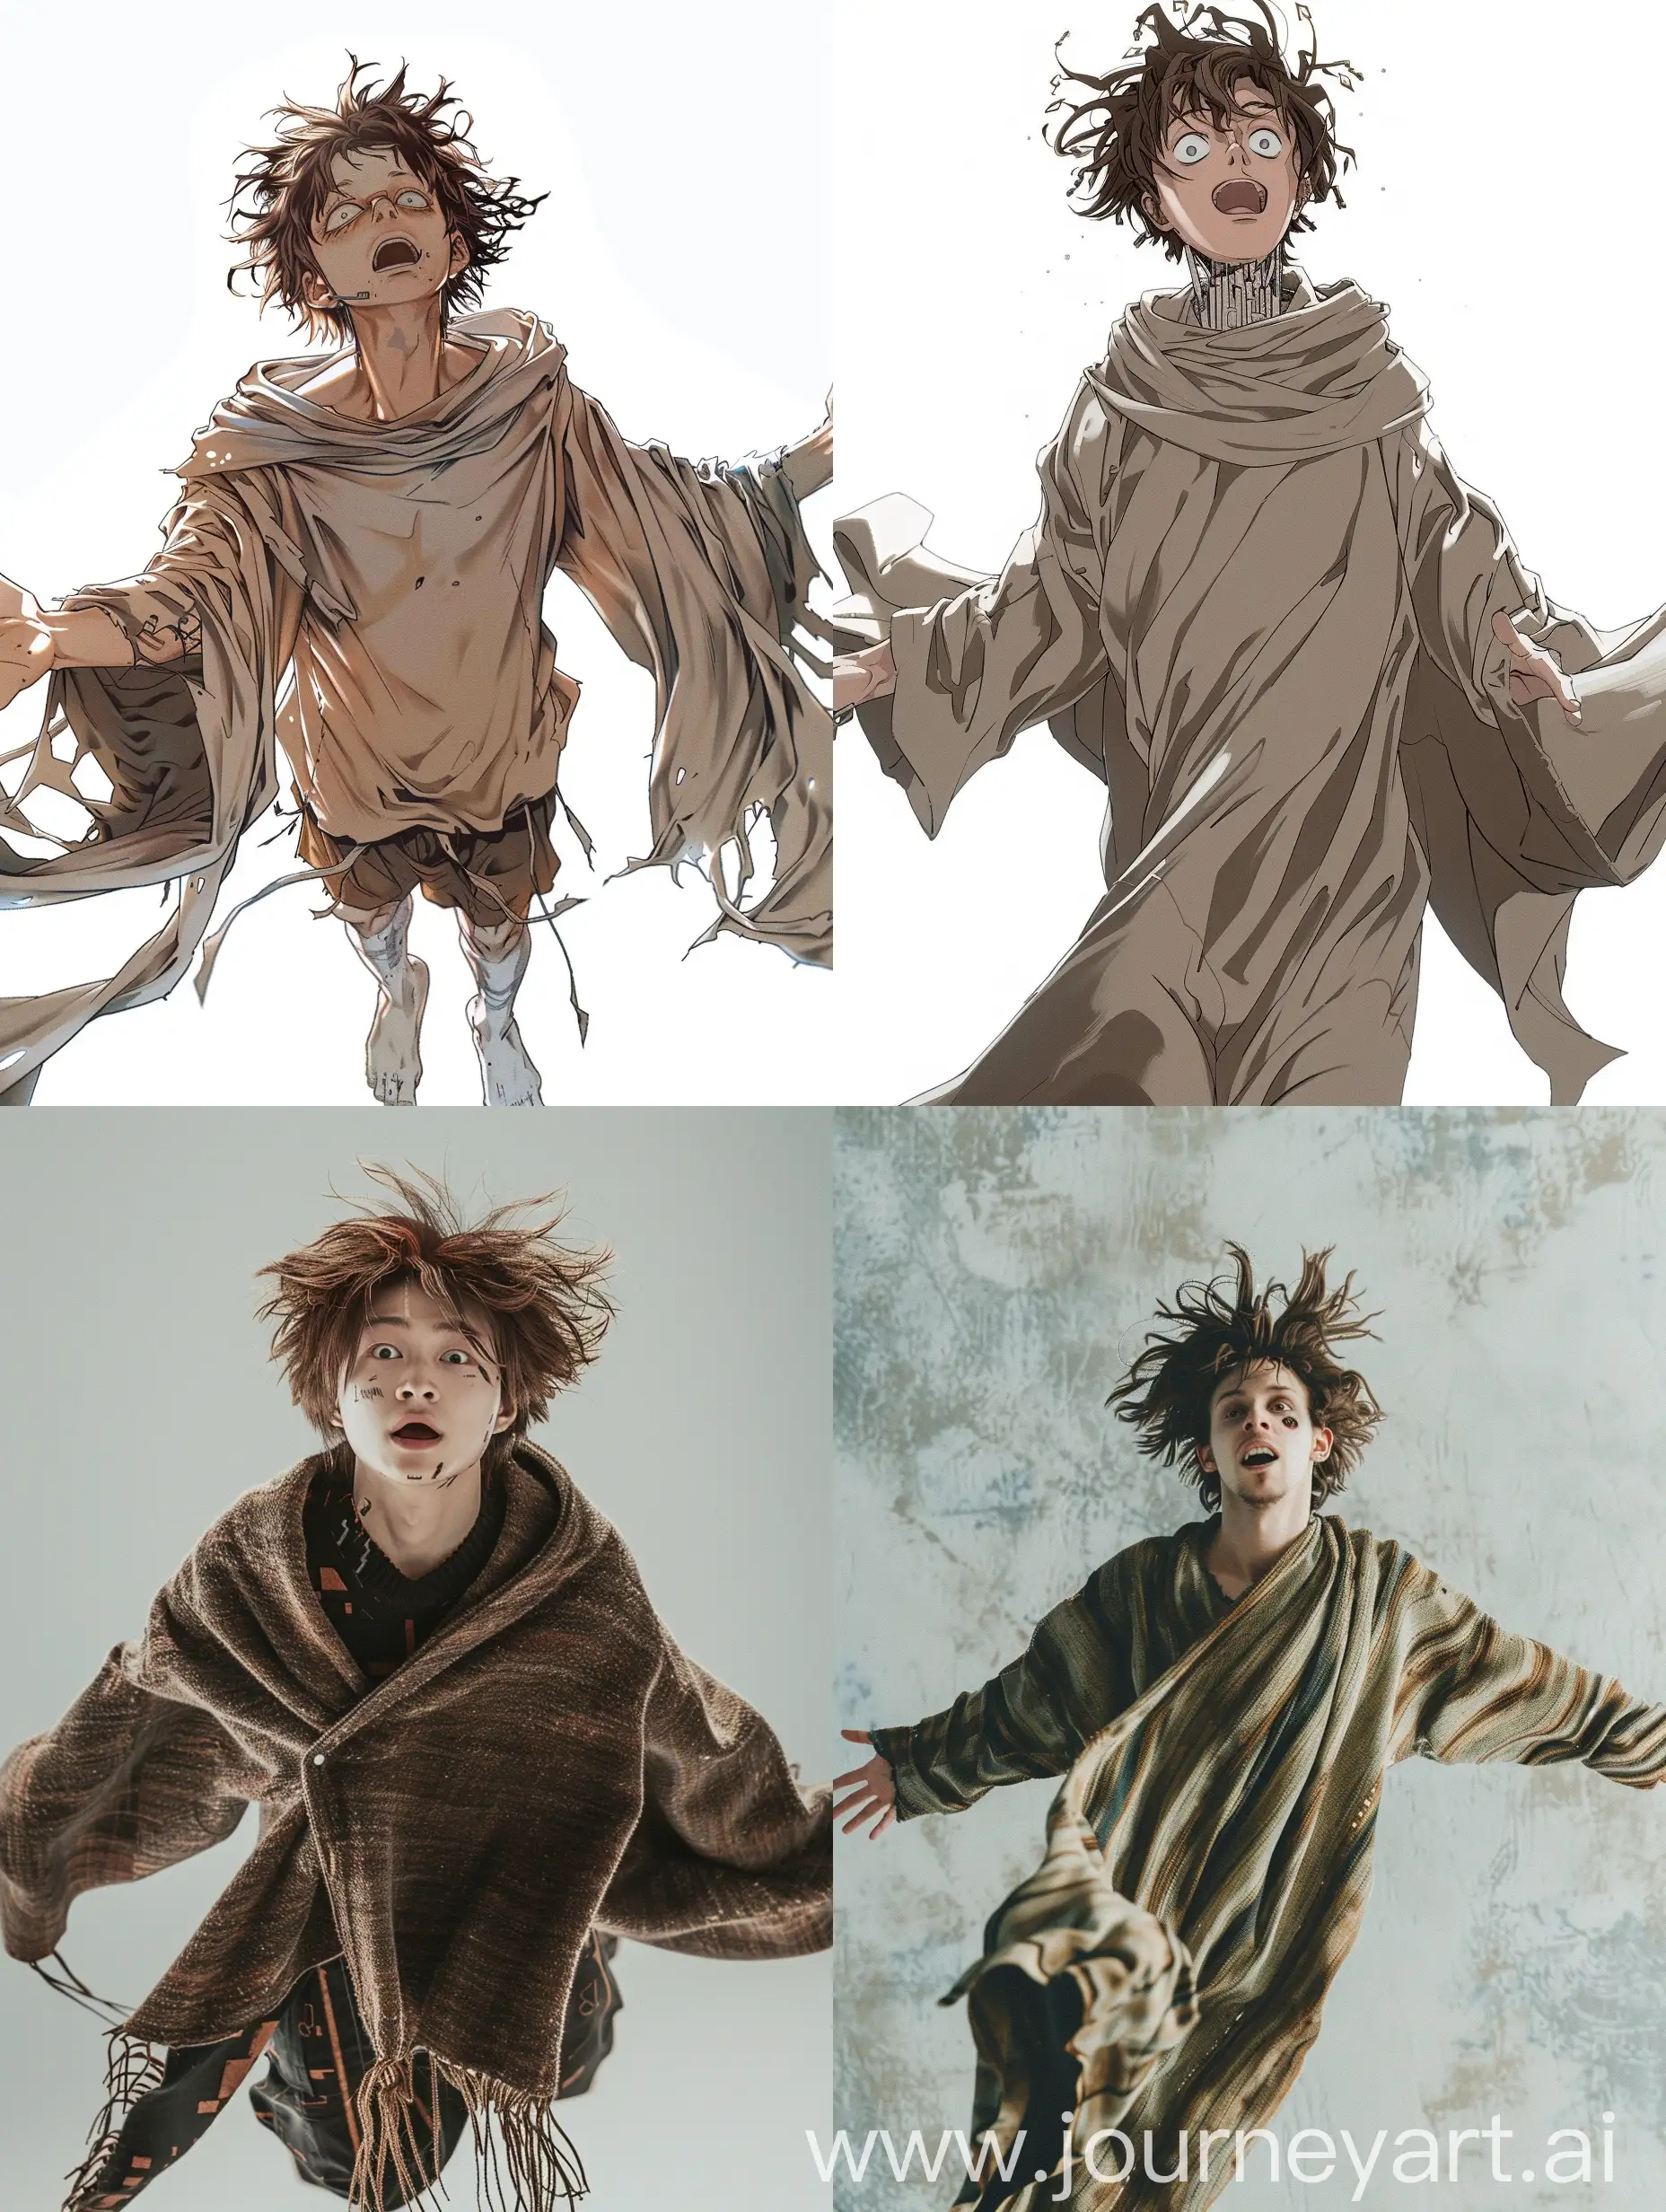 Man with messy short brown hair STUCK UP (( SKIN FADE)) as cybernetics god (((levitating in air)) with tulum poncho clothing (looking crazy WIDE EYED SMILE))) [[ANIME STYLE]] FULL BODY